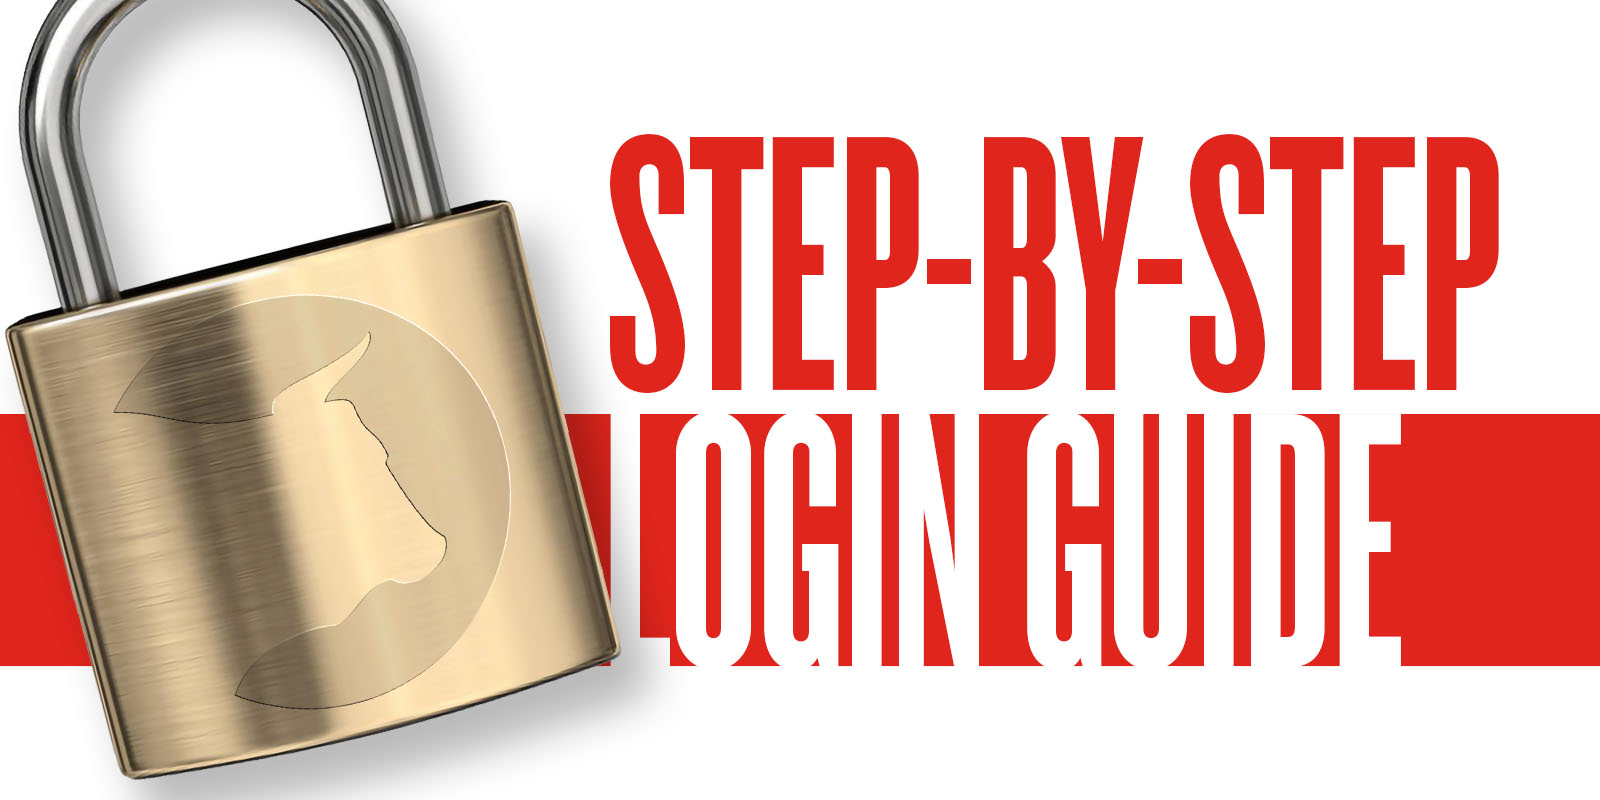 Your Step-By-Step Login Guide